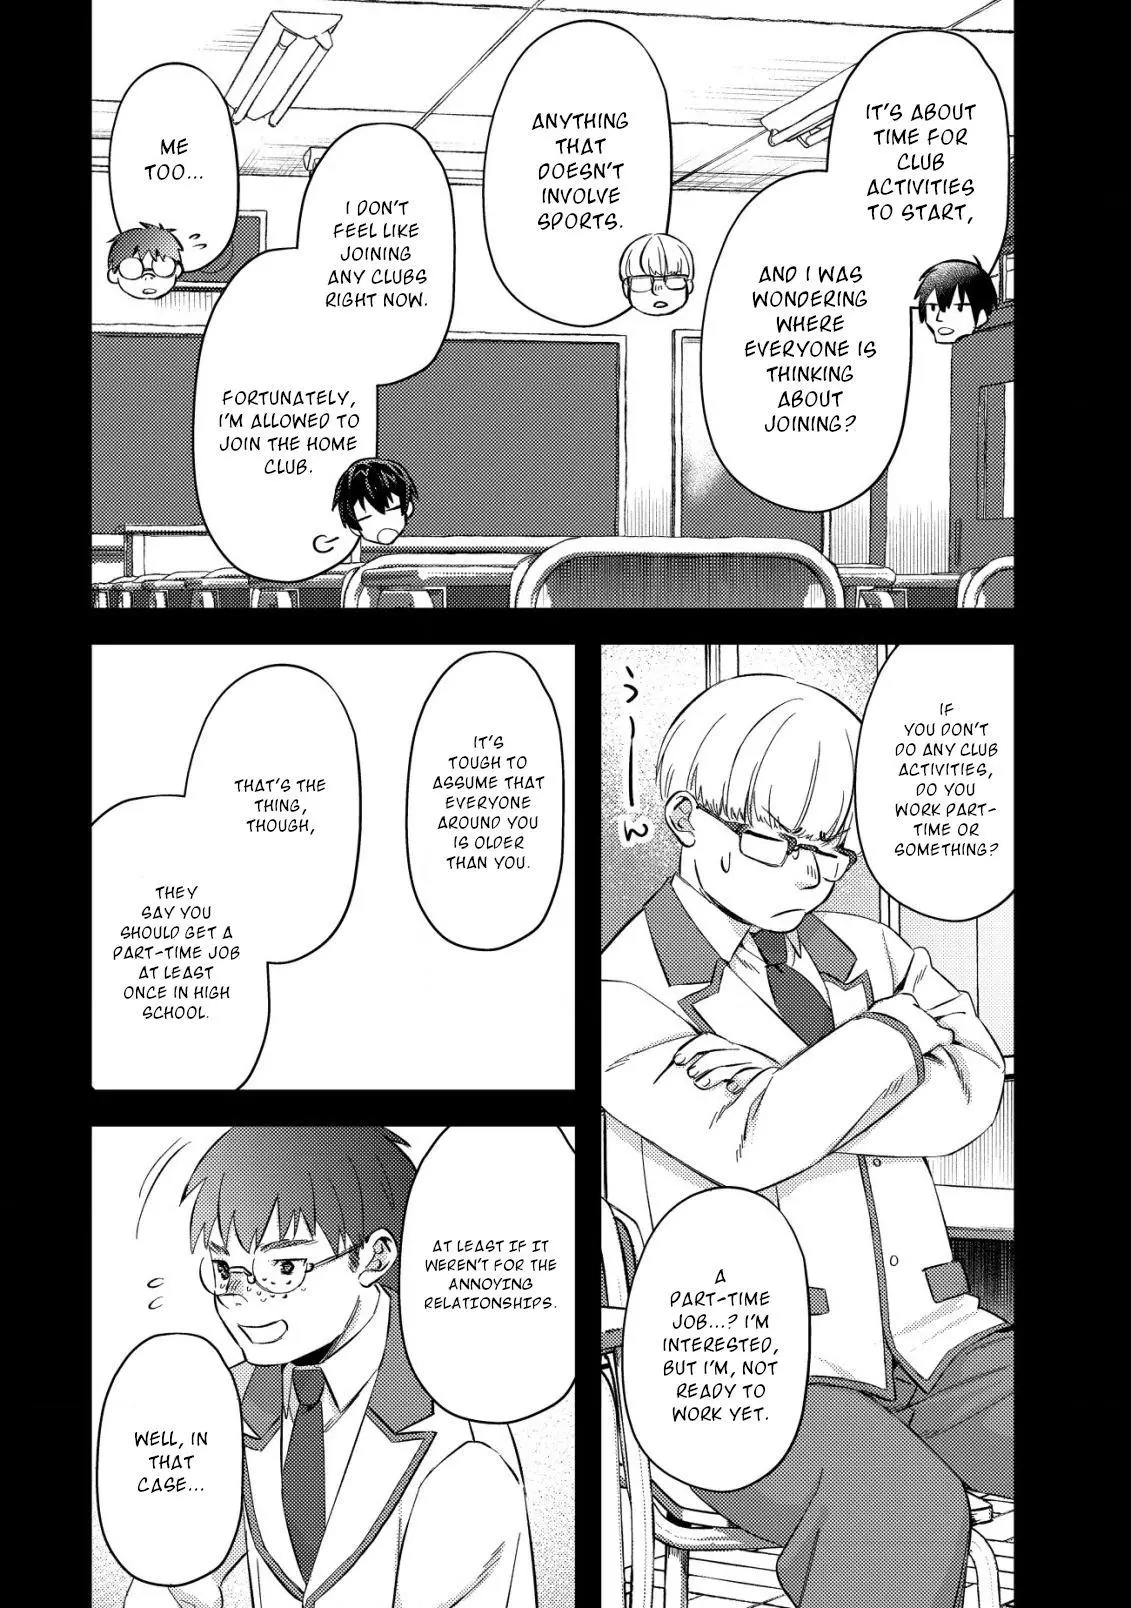 Can Even A Mob Highschooler Like Me Be A Normie If I Become An Adventurer? - 7 page 3-37e4adec